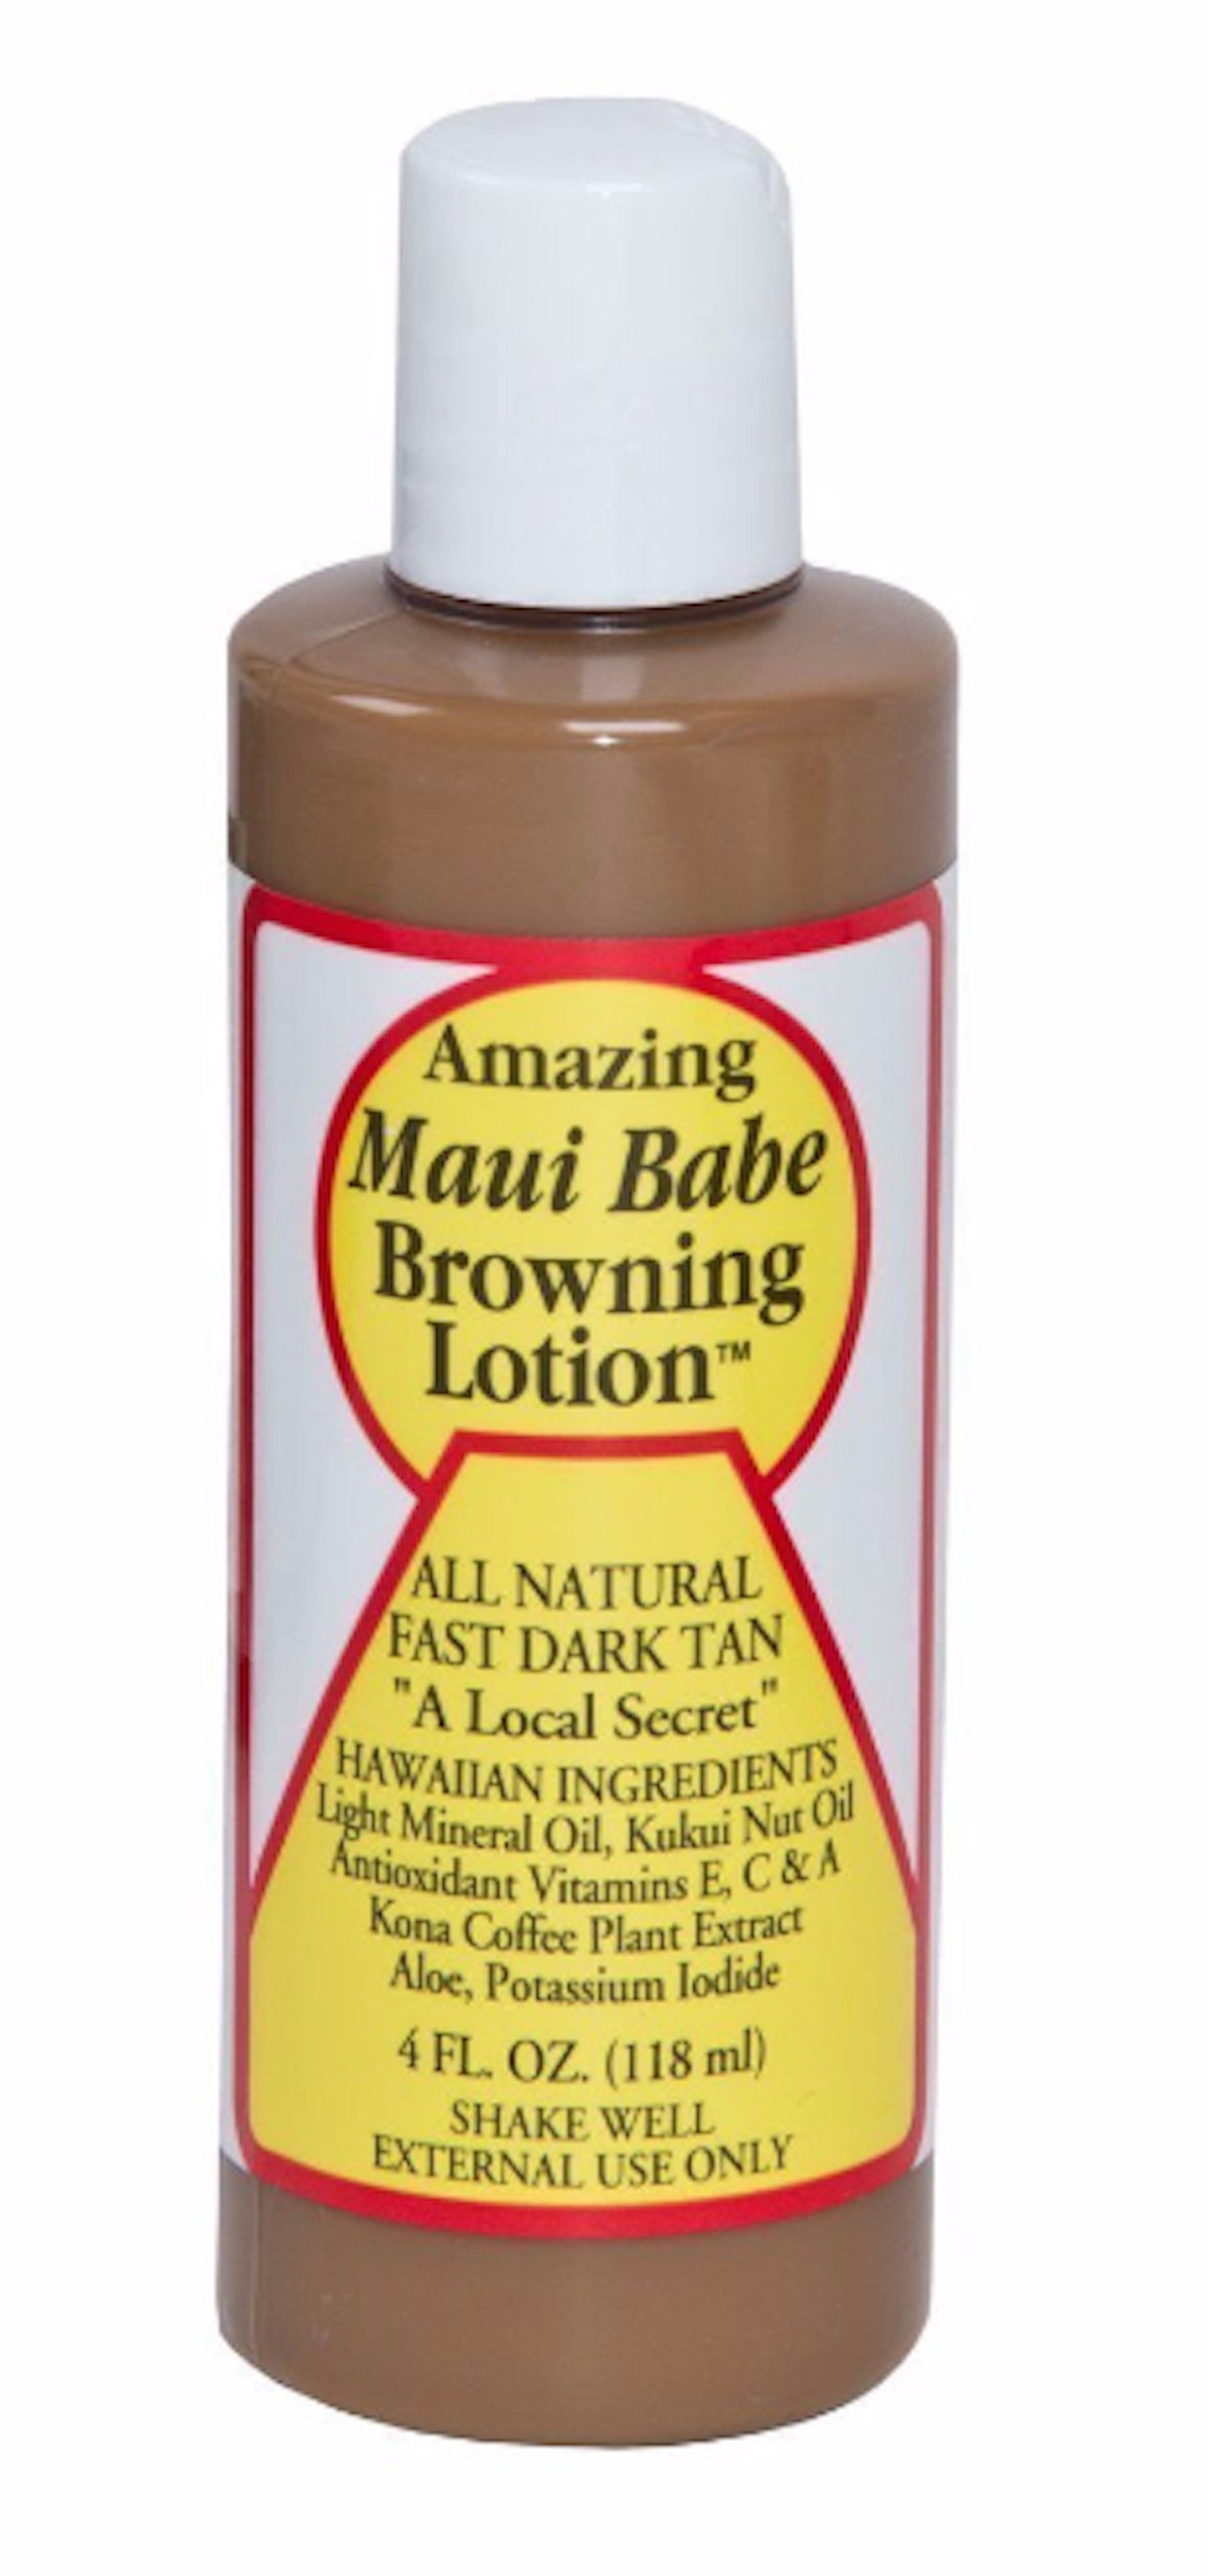 maui babe after browning lotion reviews